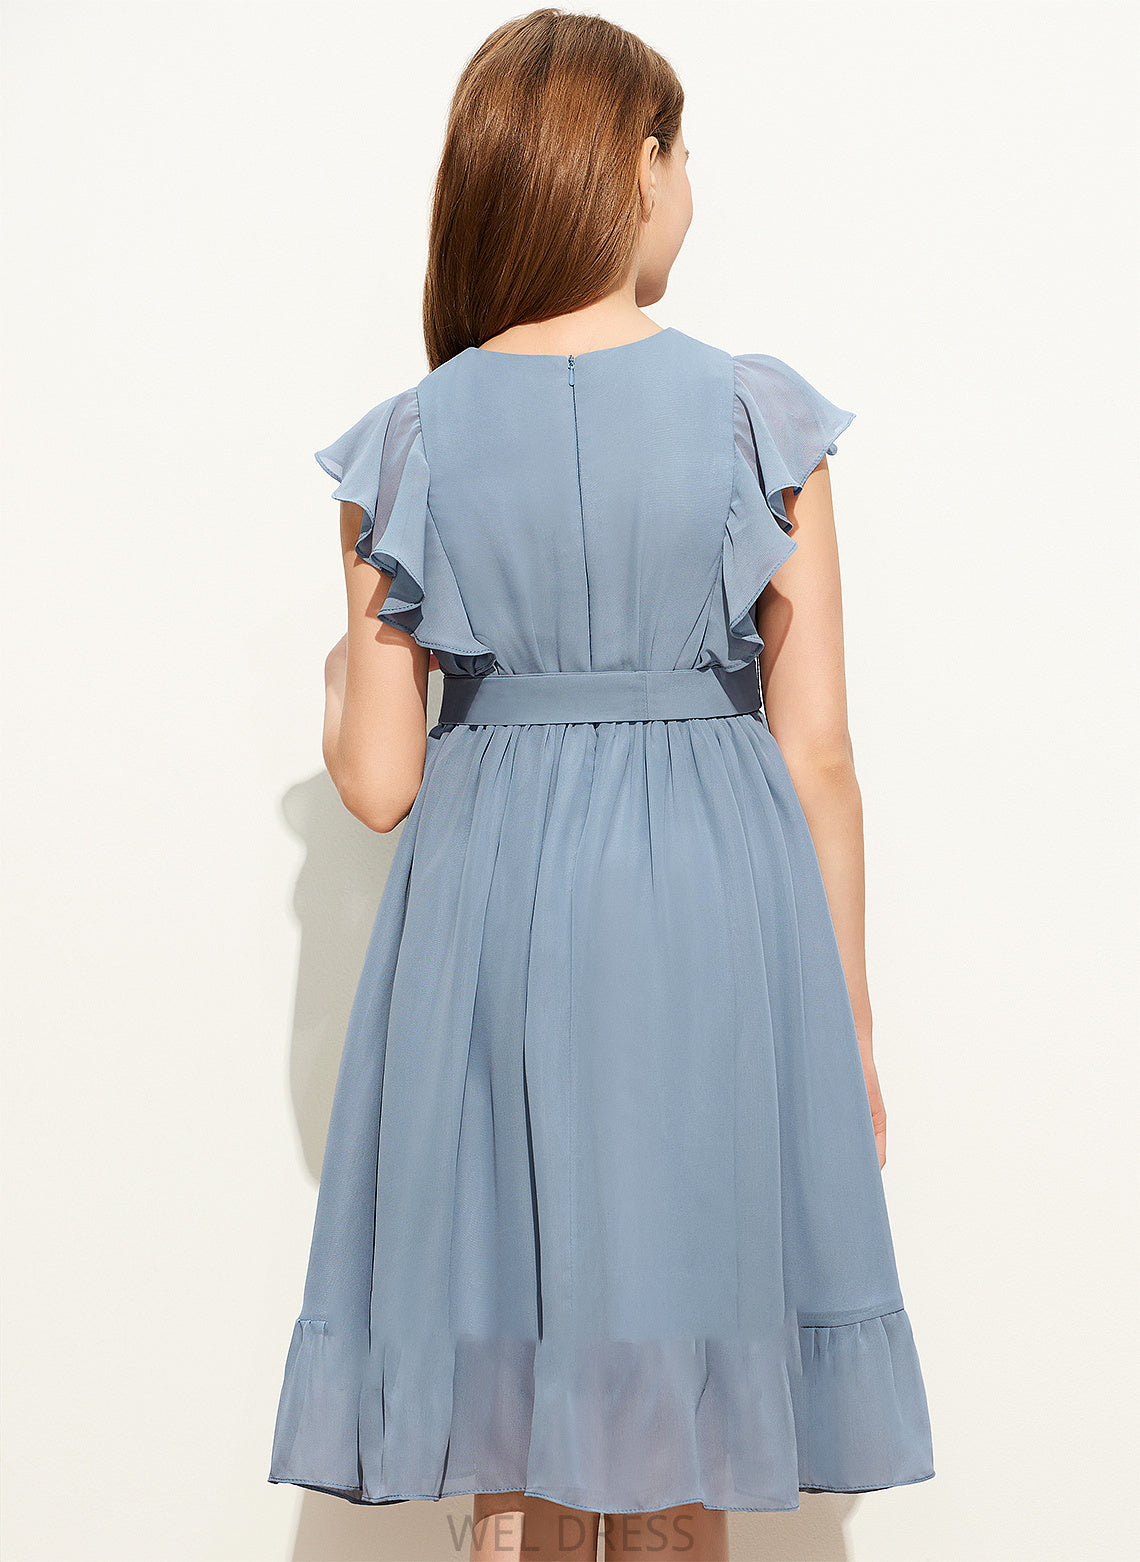 A-Line Carley Knee-Length Scoop Bow(s) Junior Bridesmaid Dresses With Chiffon Cascading Ruffles Neck